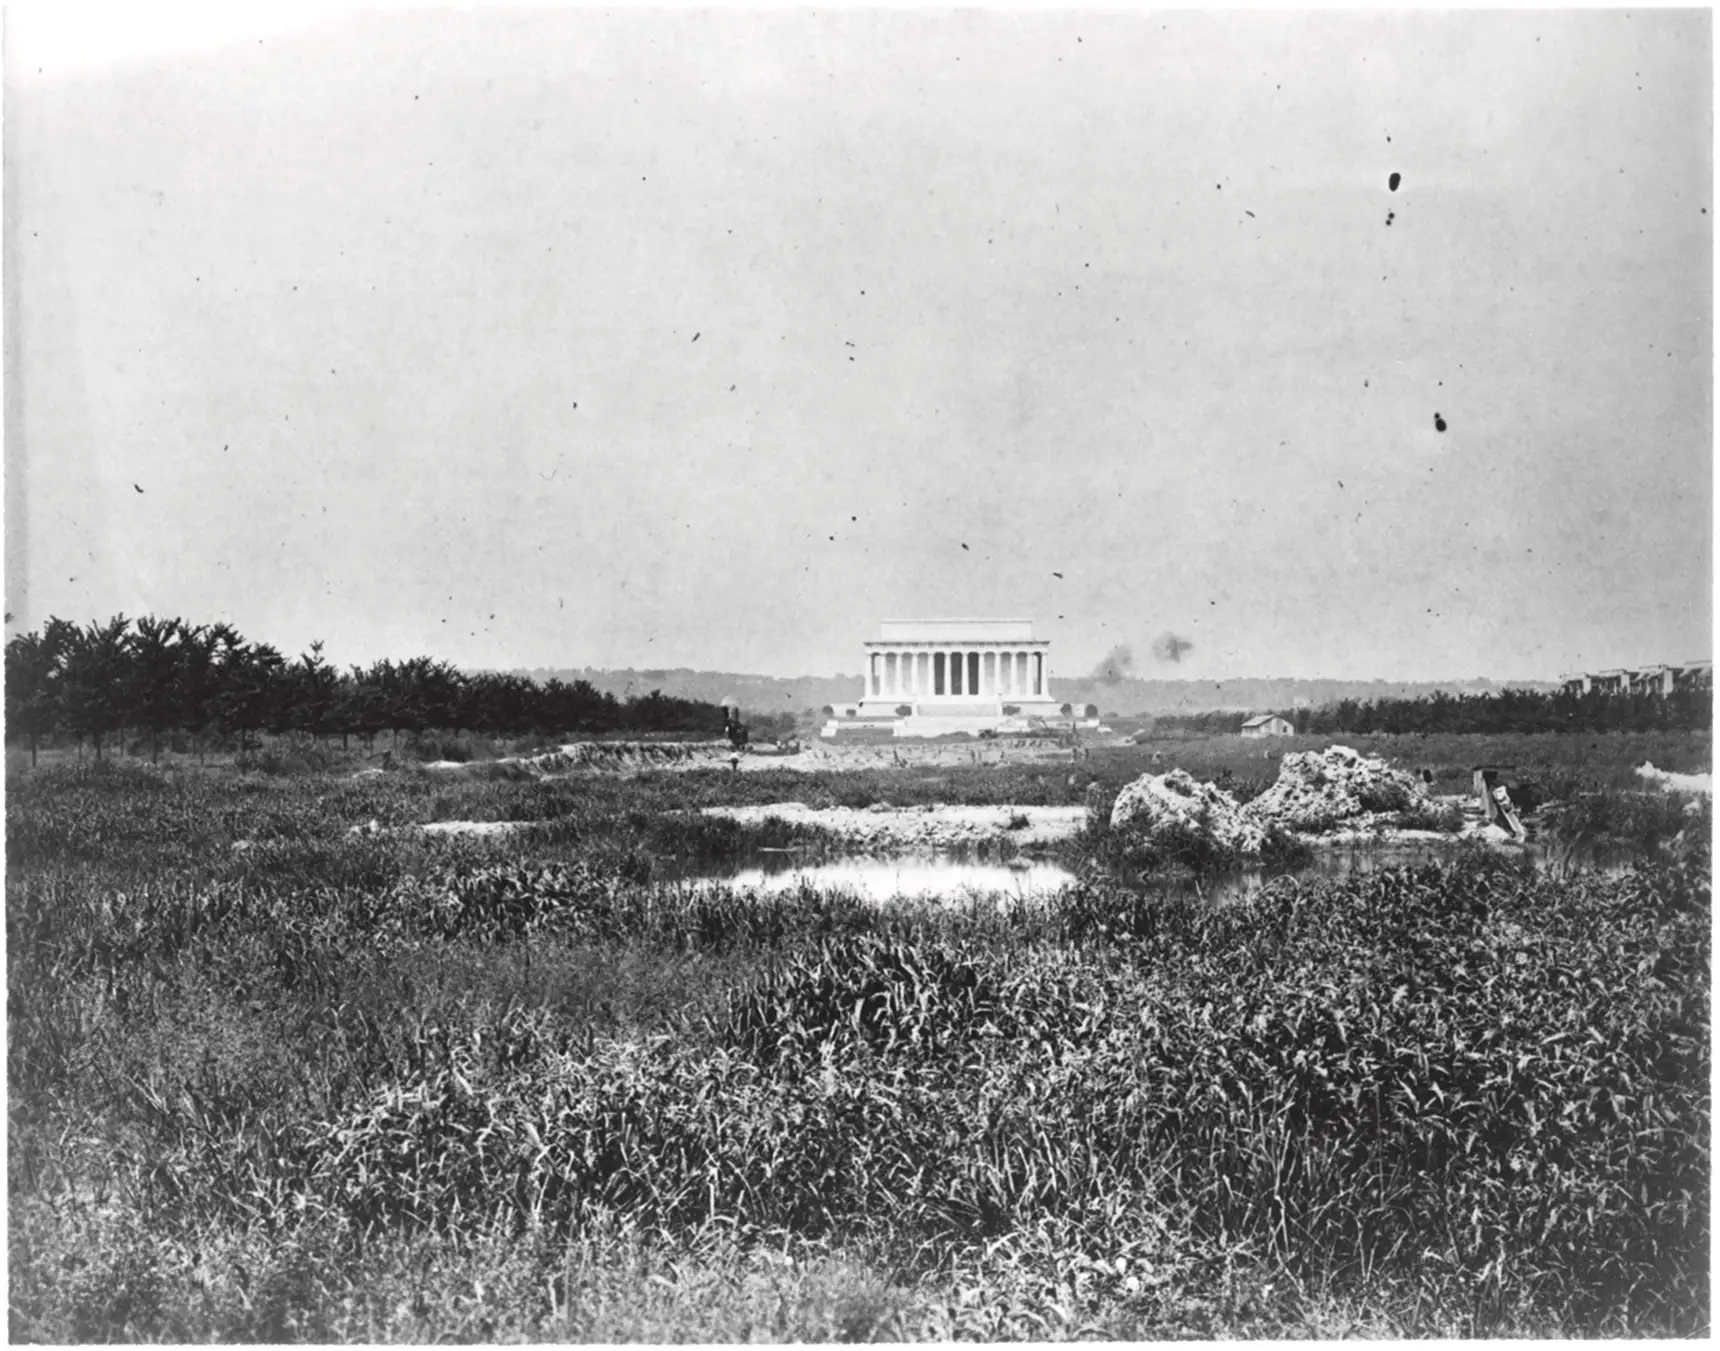 Early 20th century photo of the Lincoln Memorial with a marsh in the foreground.